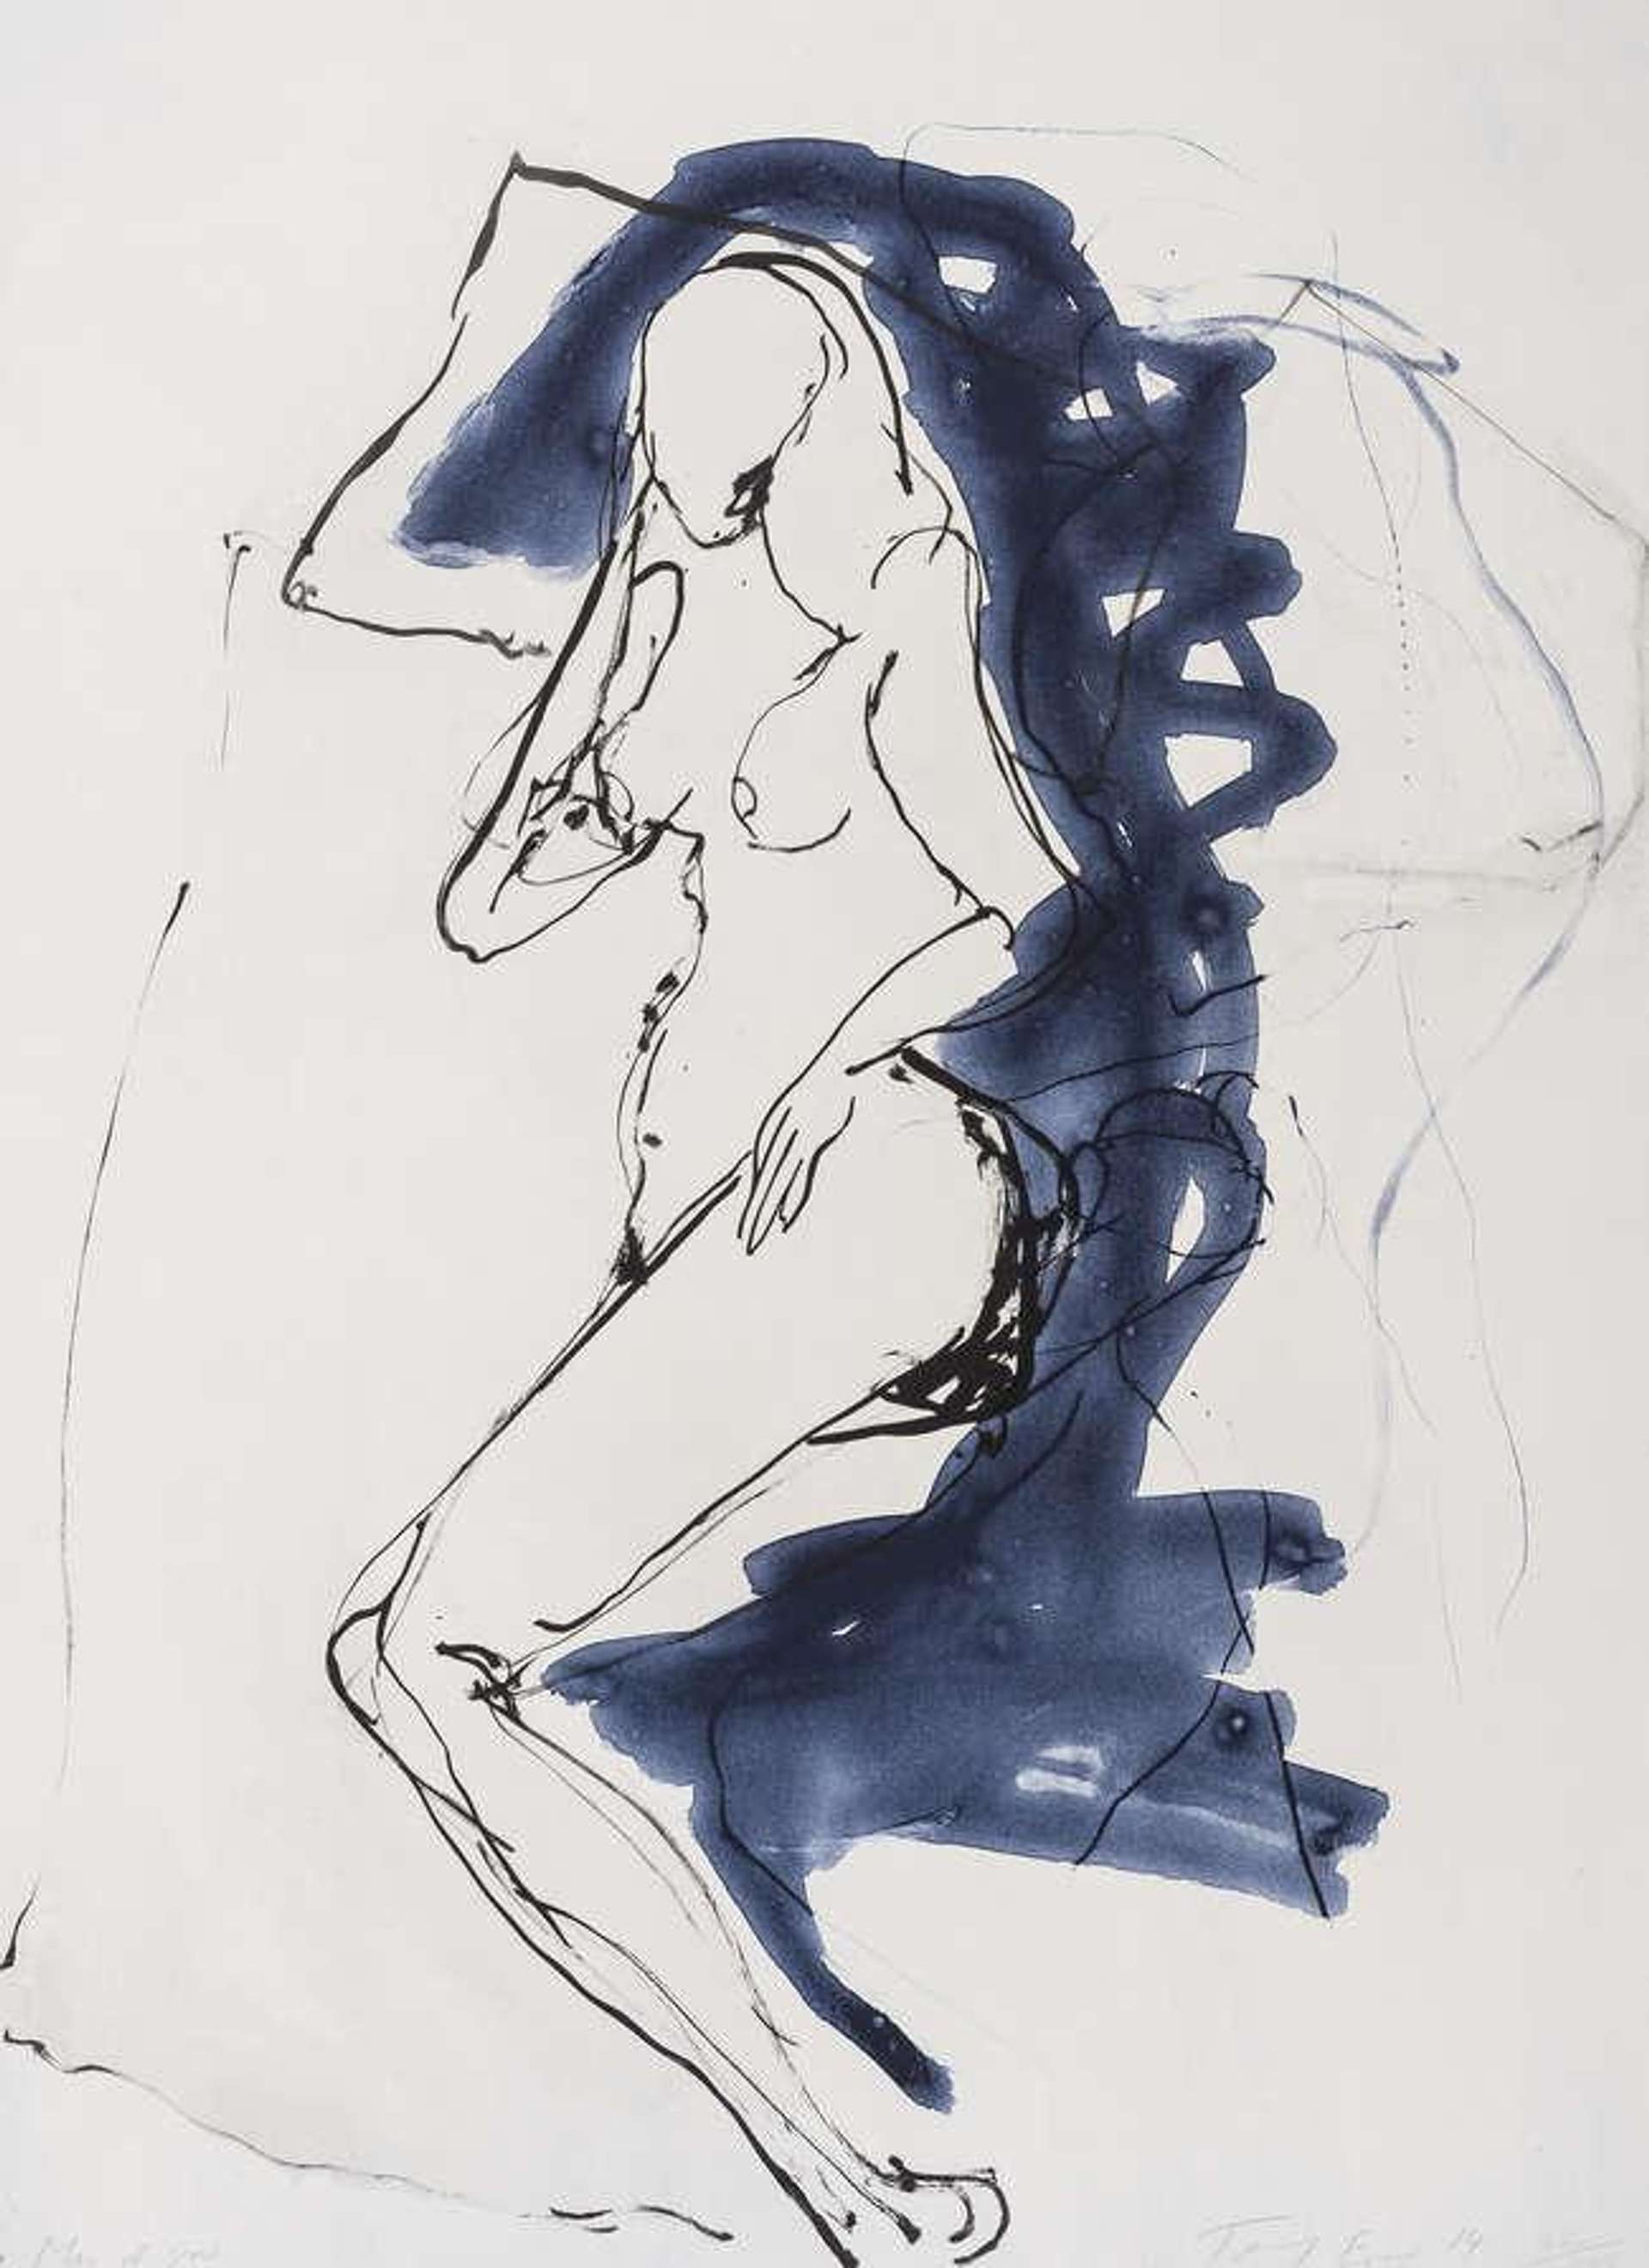 Tracey Emin’s More Of You. A sketch of nude woman laying in bed turned to her right side